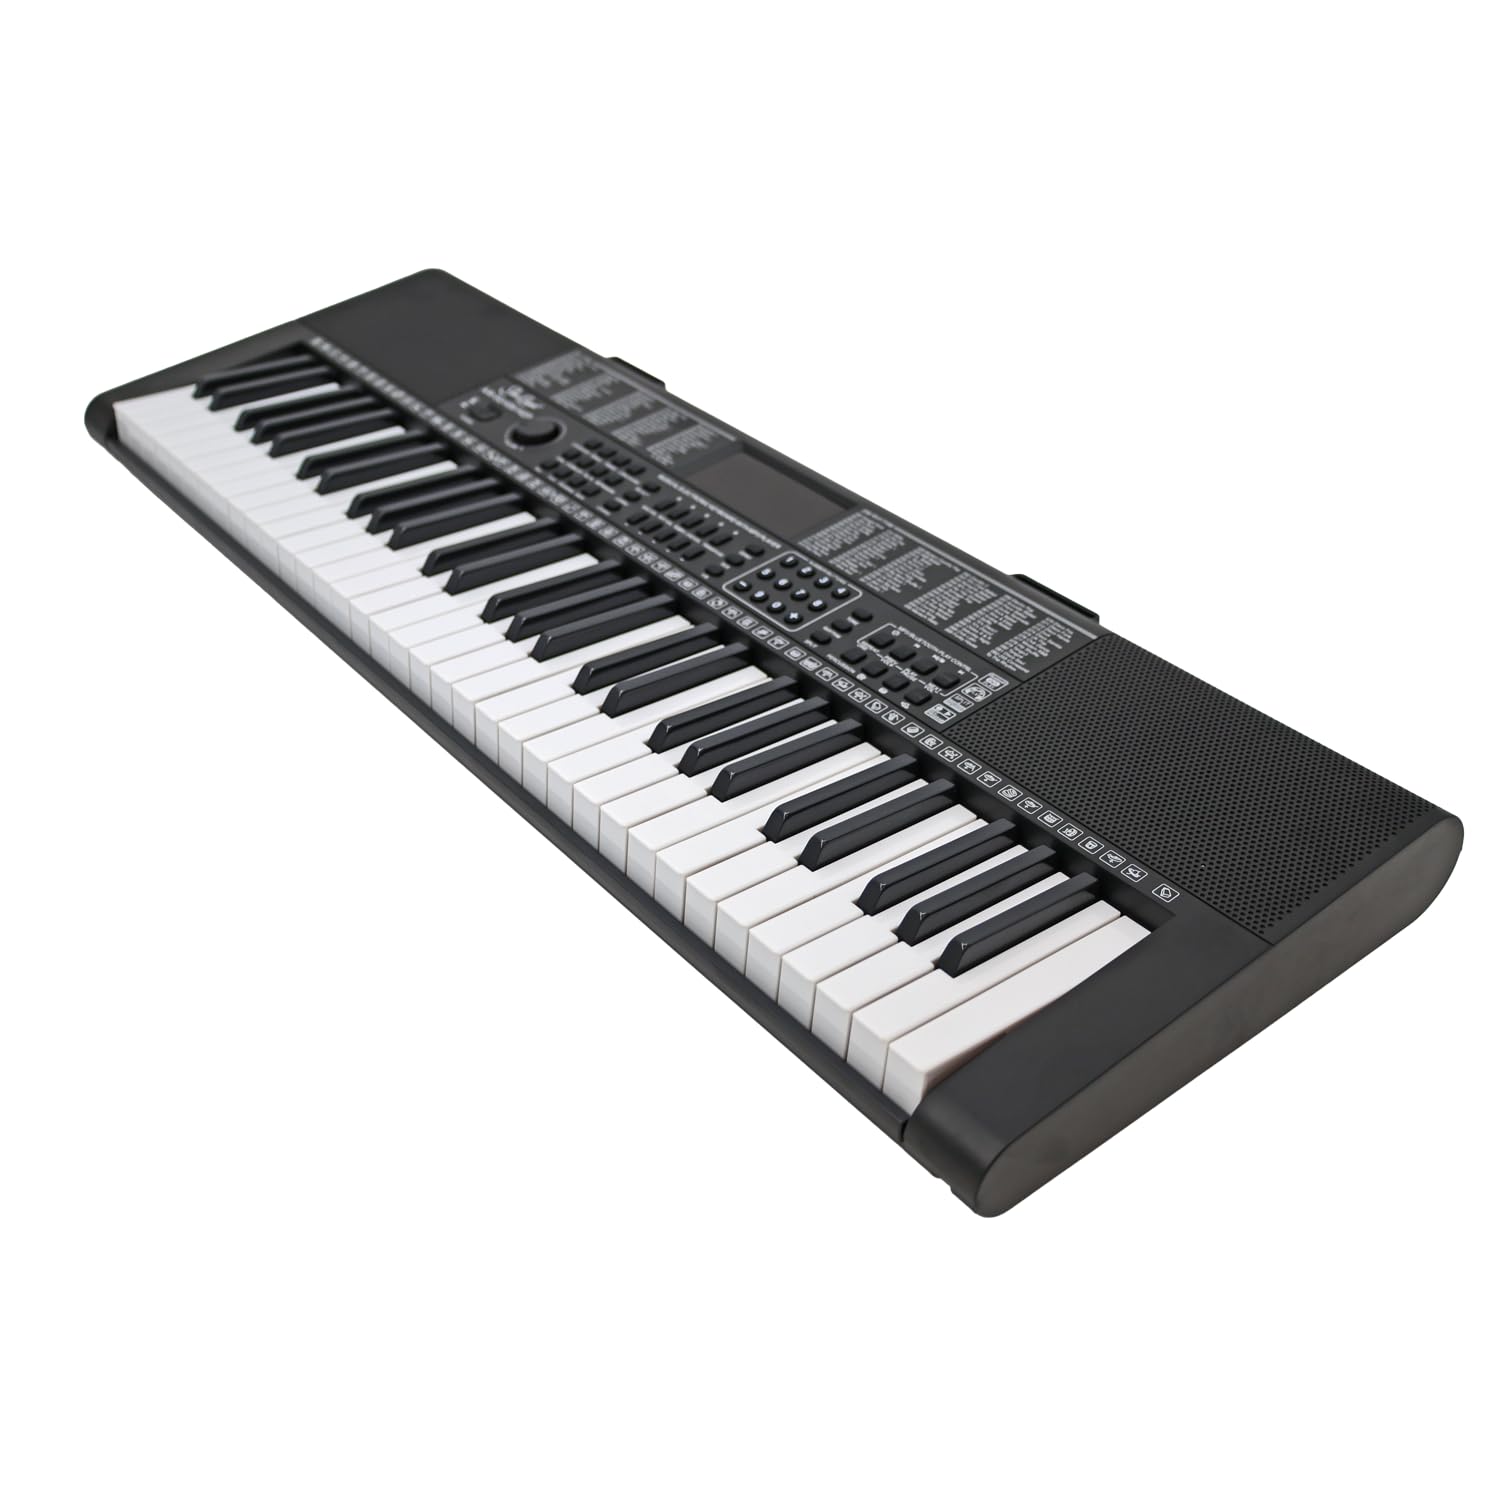 StarQuest SQ-KB61KEP 61-Key Portable Electronic Keyboard – Digital Piano for Beginners and Experienced Musicians, Multi-Functional, Premium Sound Quality